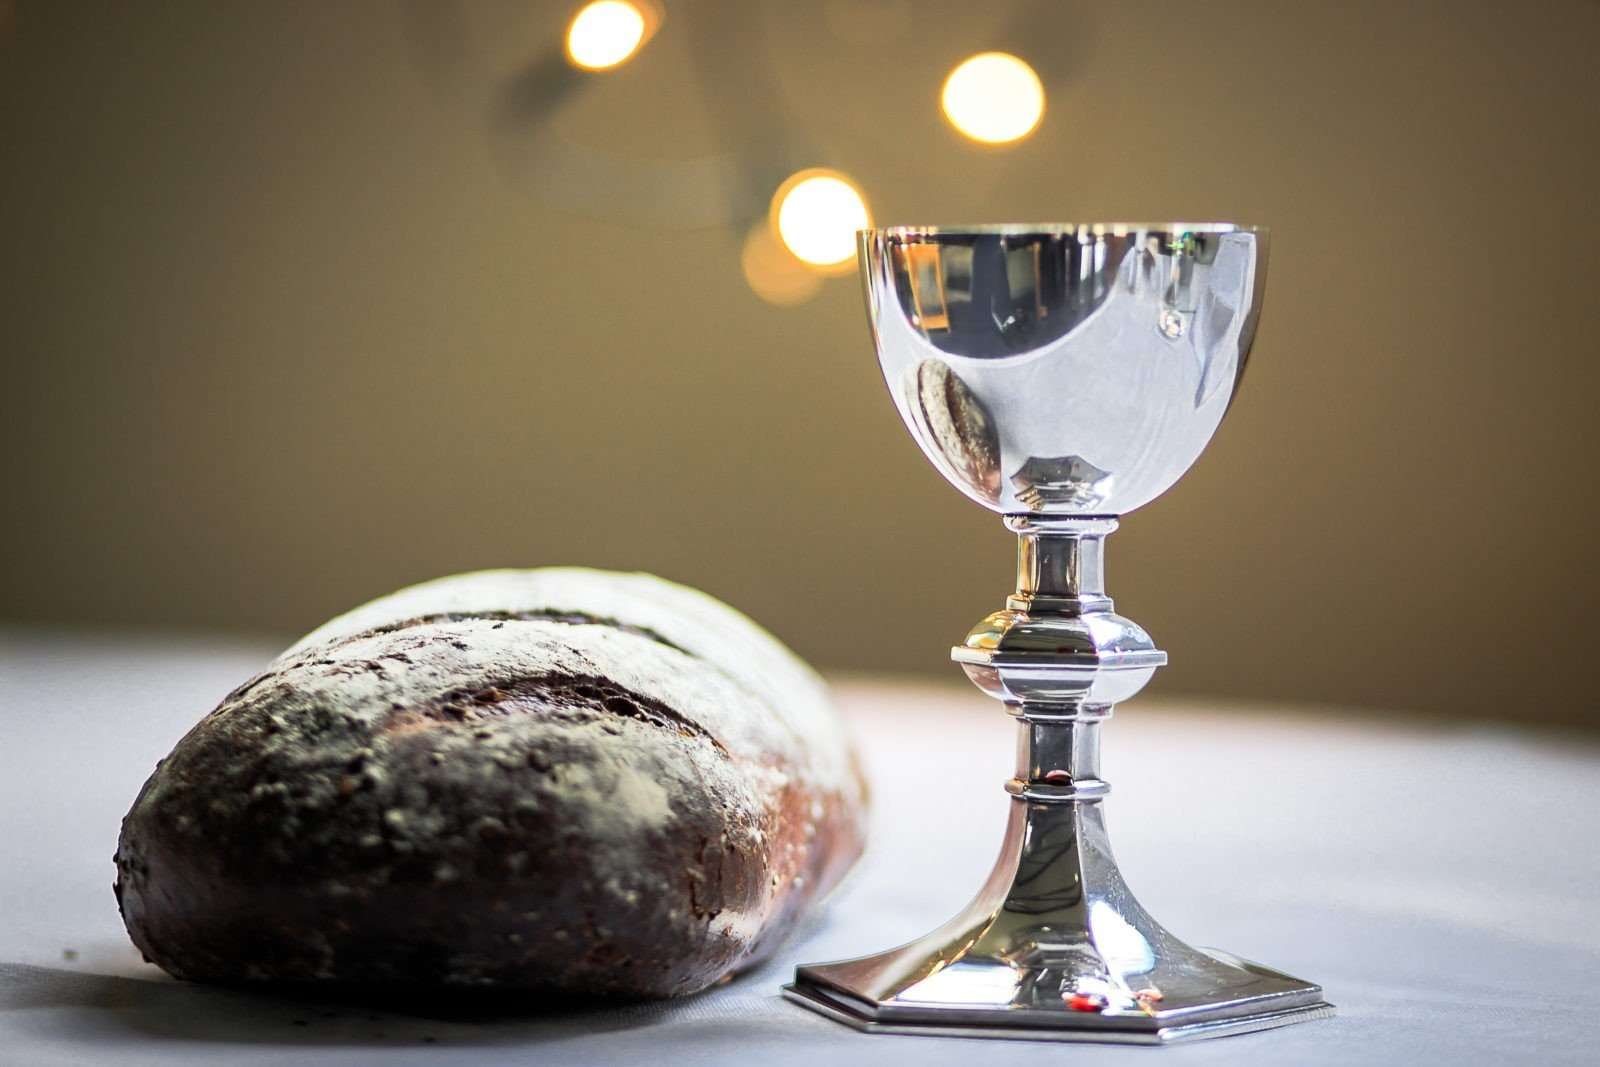 What would Paul say about the Practice of Online Communion?